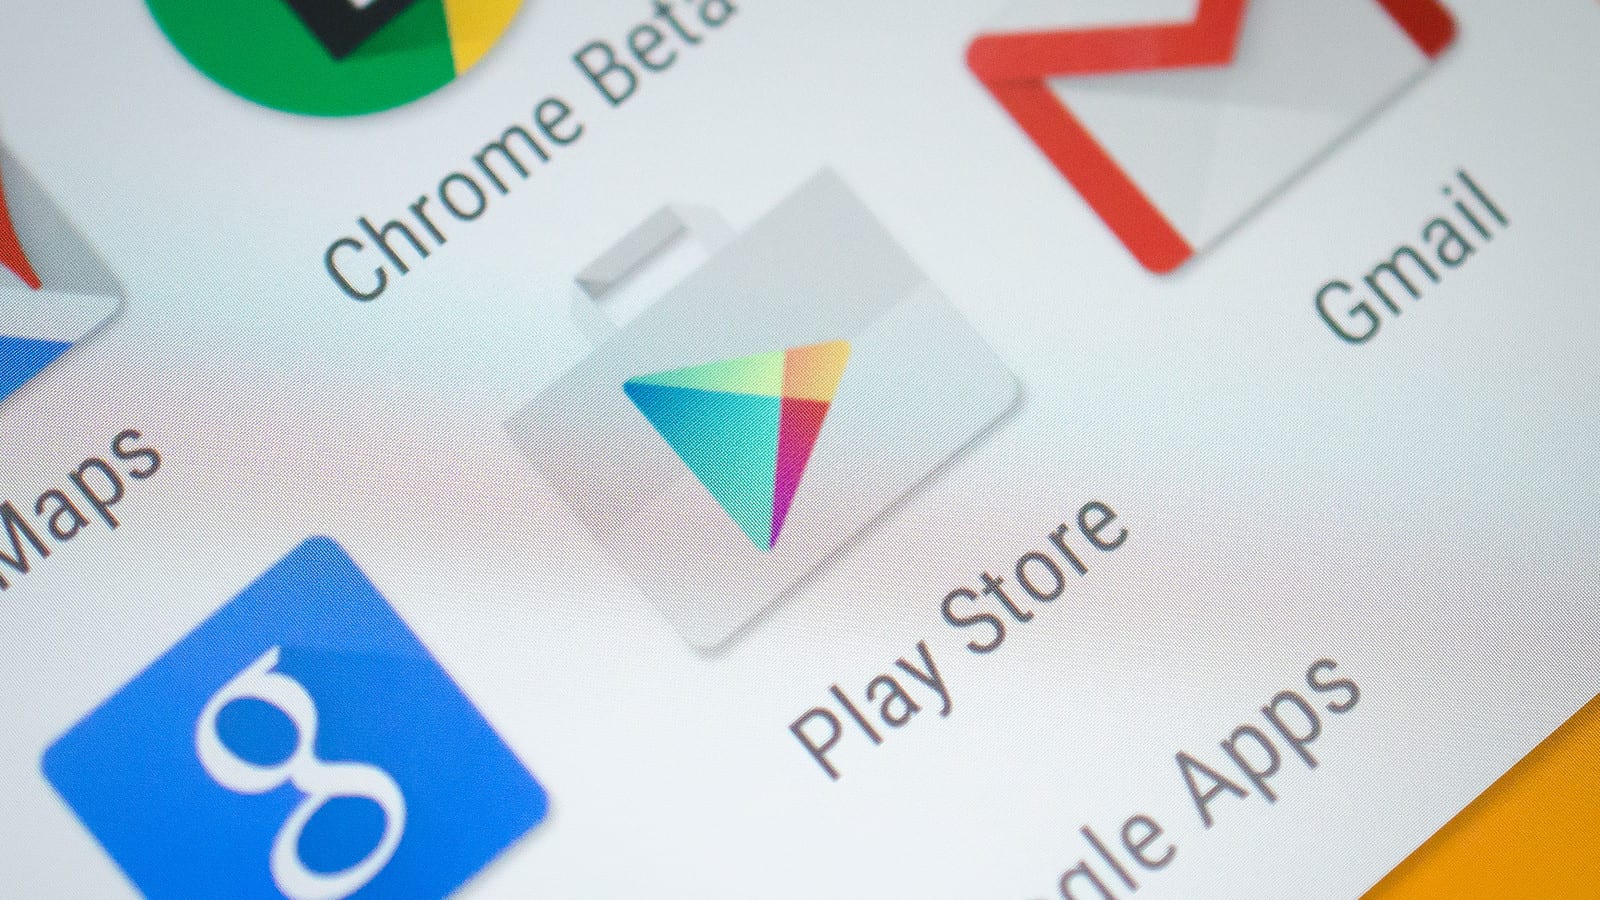 Google Bans More Than 100 Android Apps This Year!